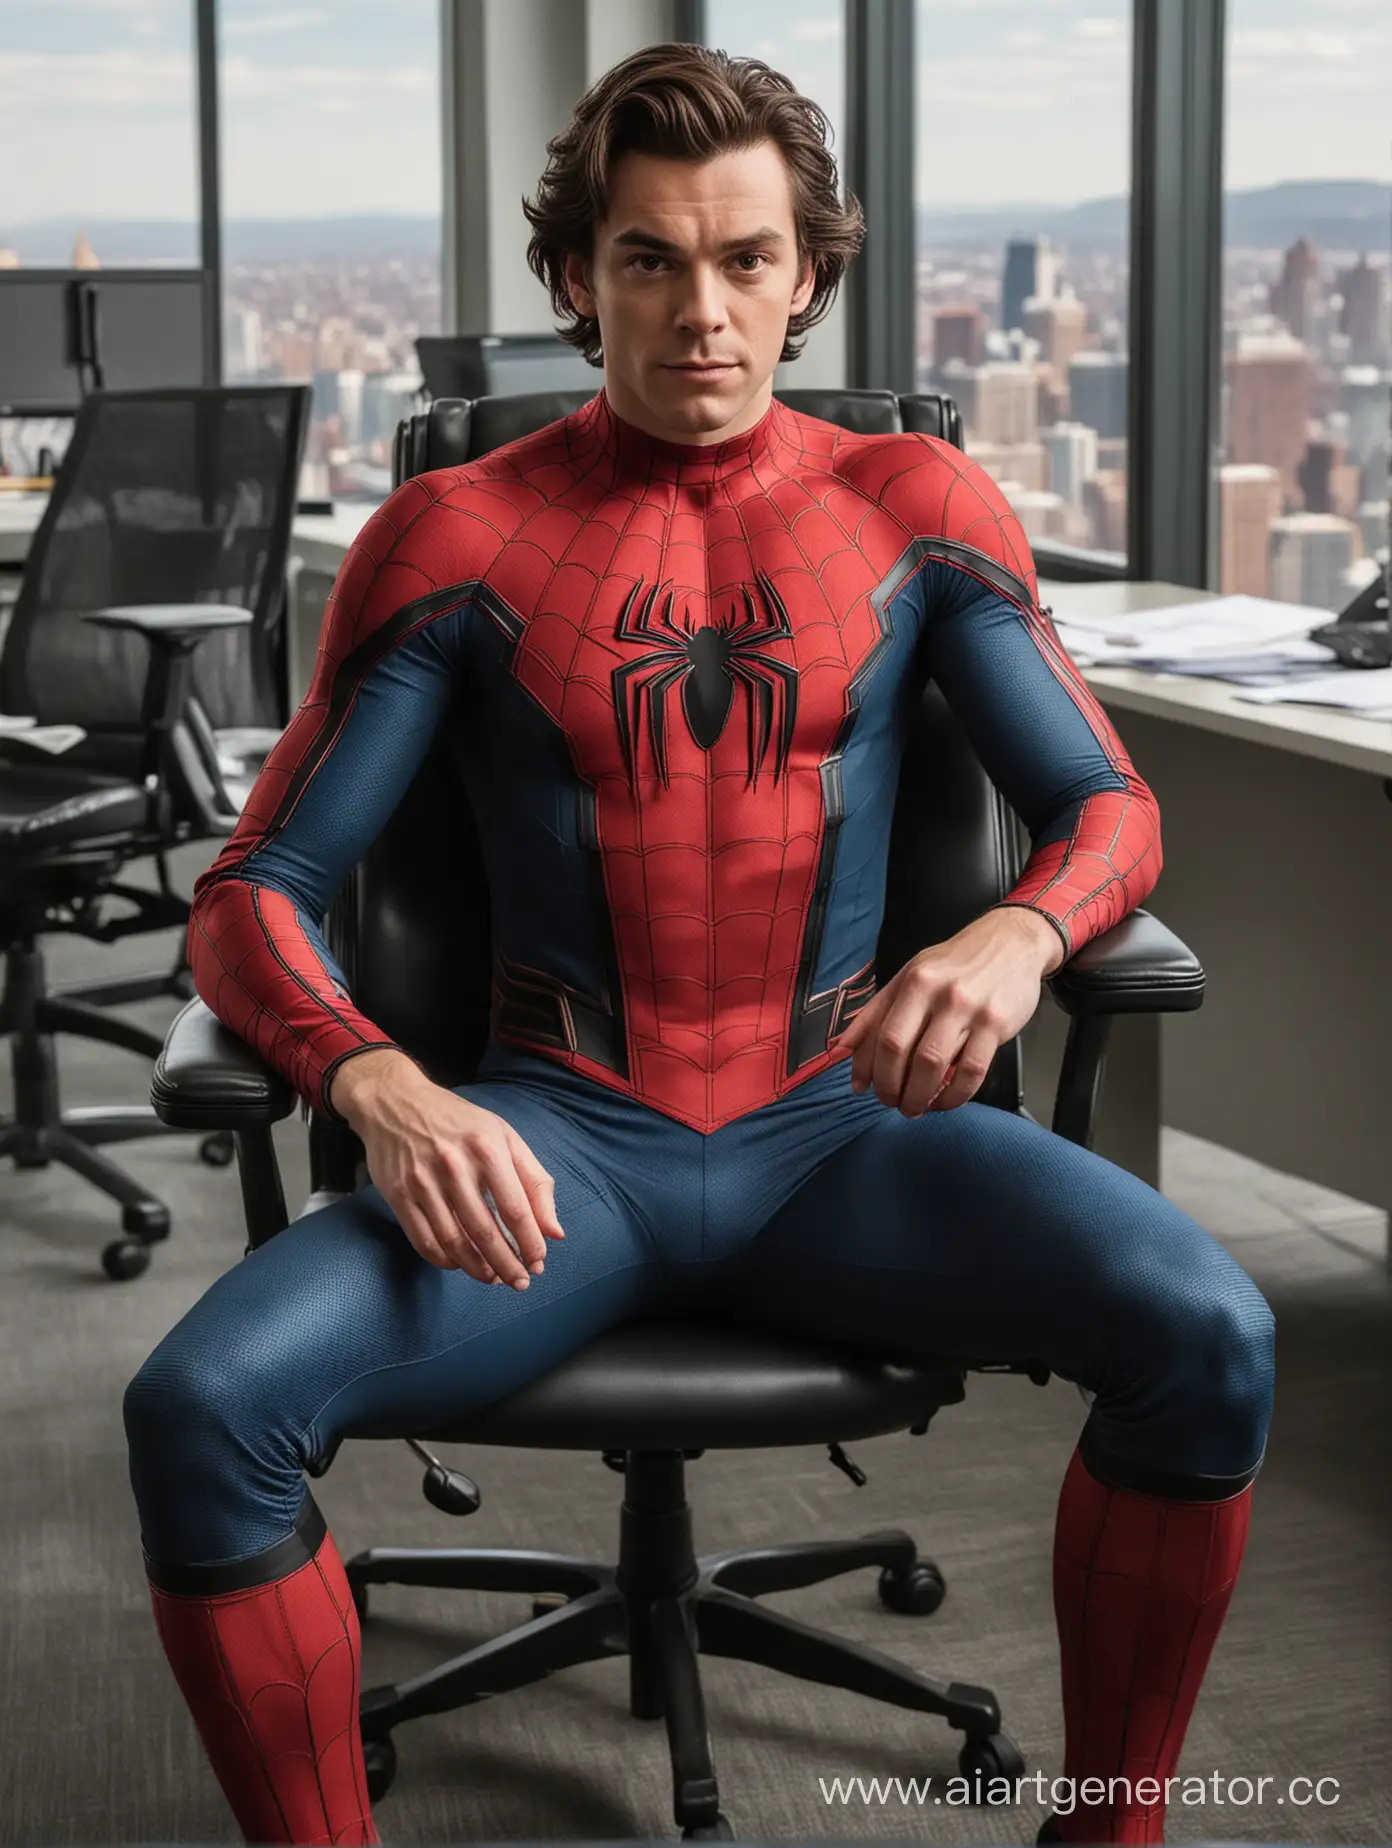 Thomas-Stanley-Sitting-in-Expensive-Chair-in-SpiderMan-Costume